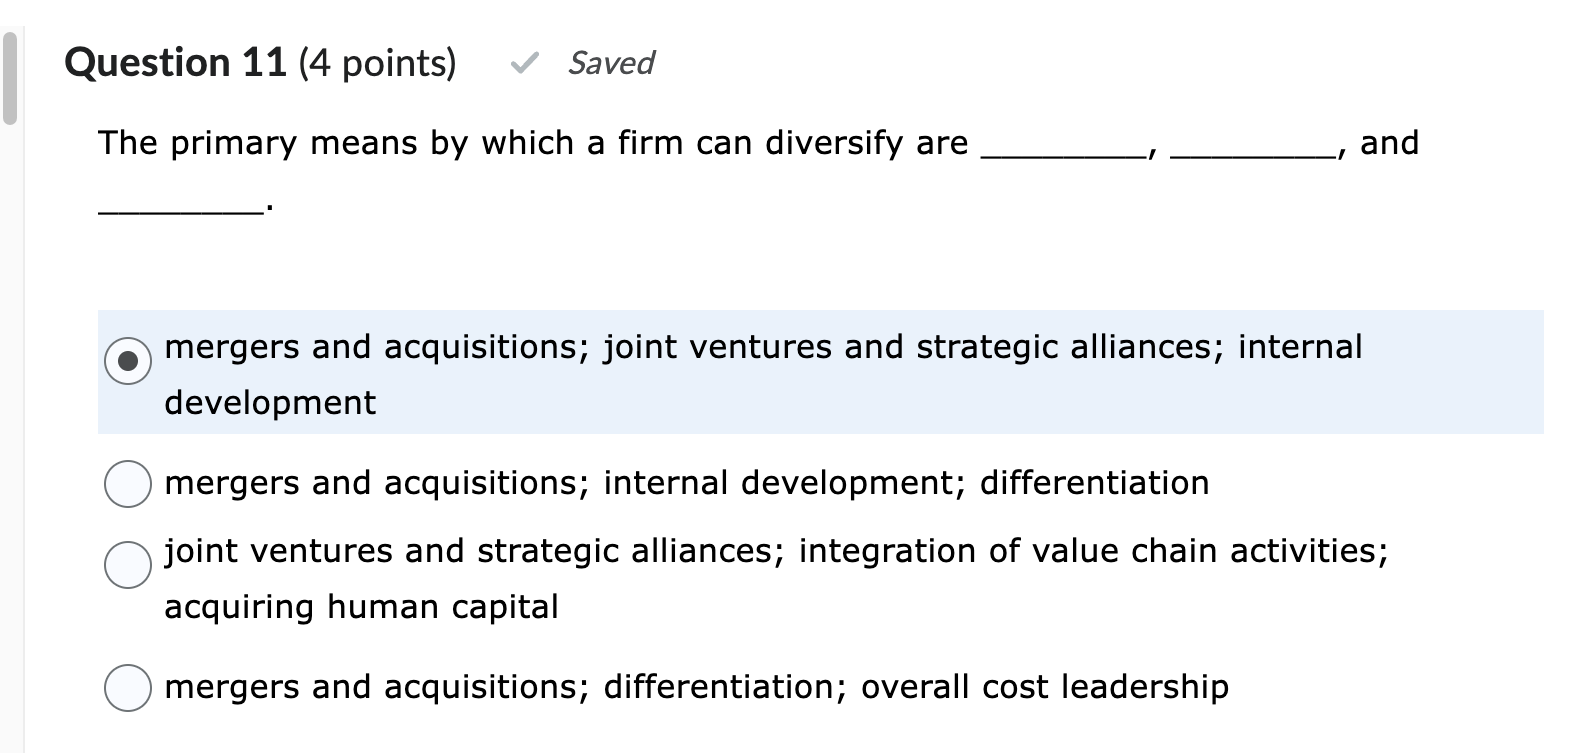 Question 11 (4 points) The primary means by which a firm can diversify are Saved and mergers and